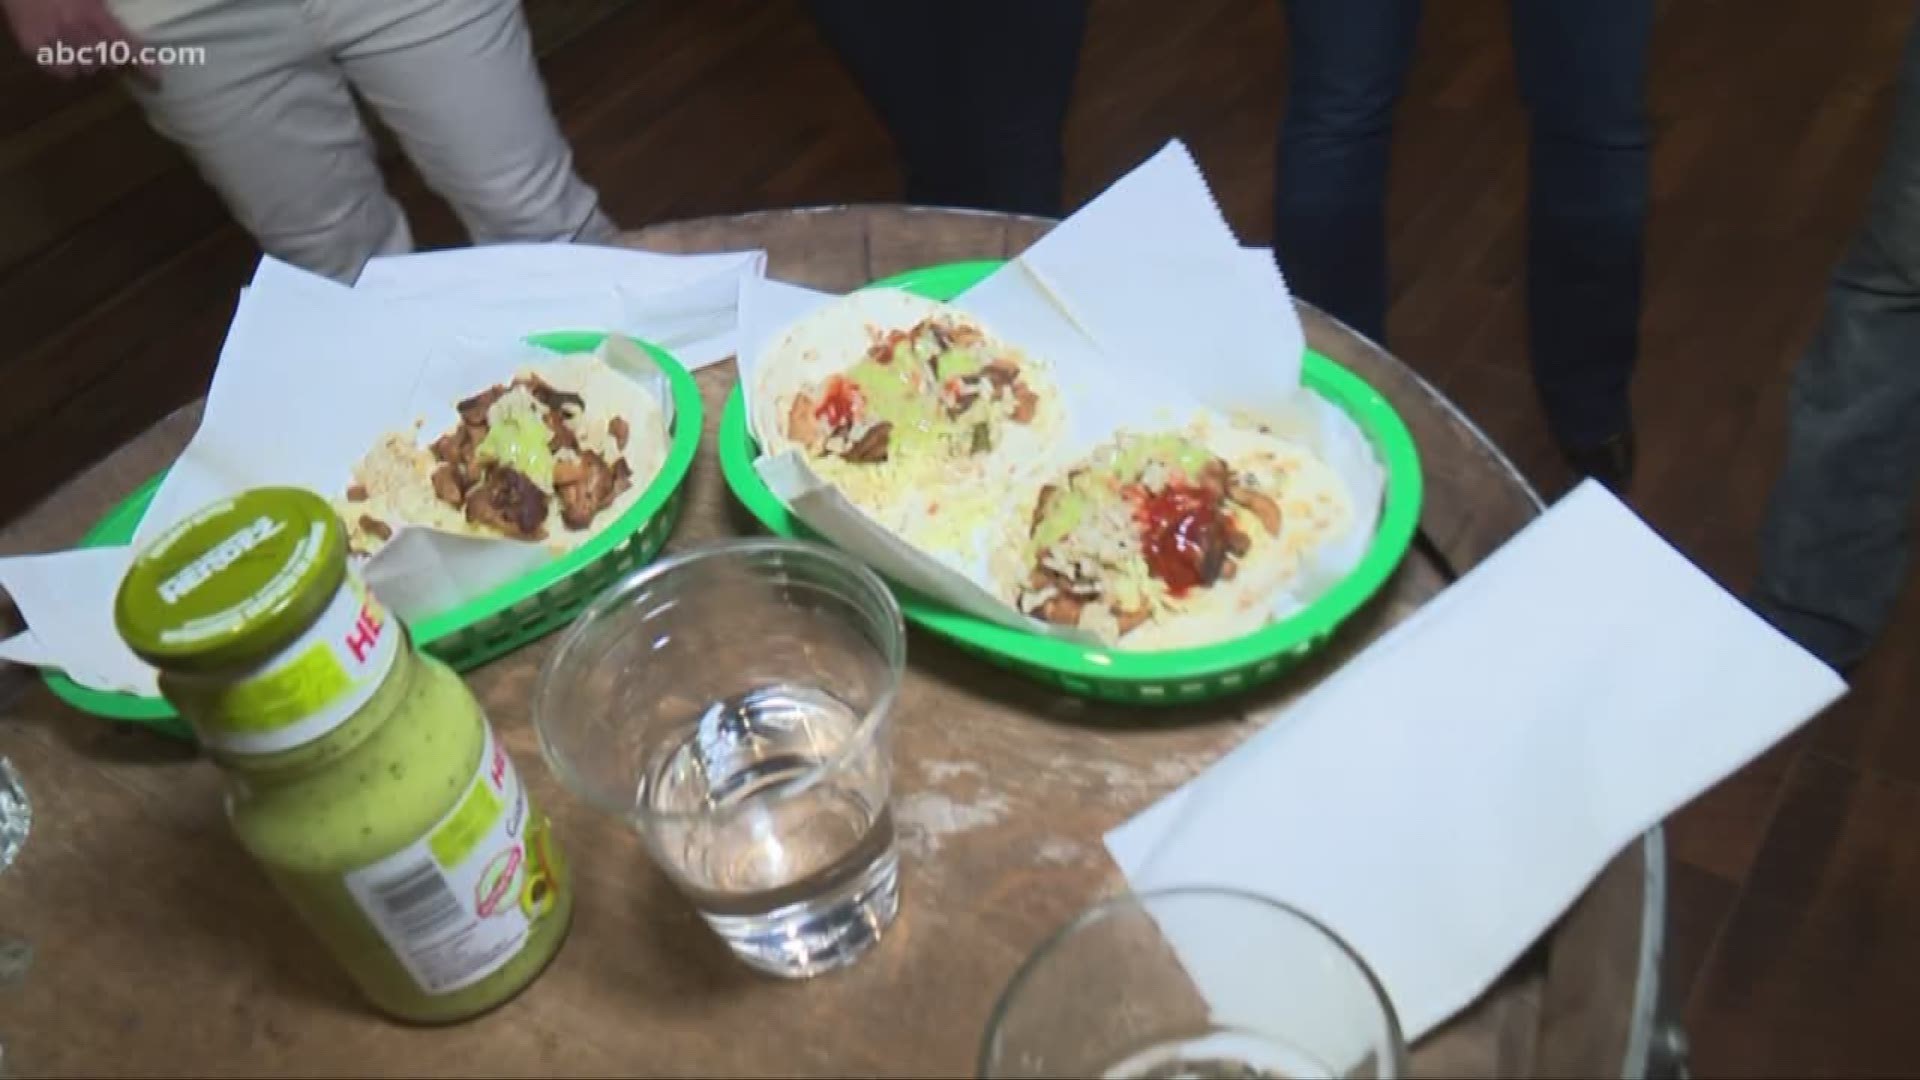 If you love Tacos and want to meet other Taco lovers, you might need to check out the "Taco Mafia' in Sacramento.